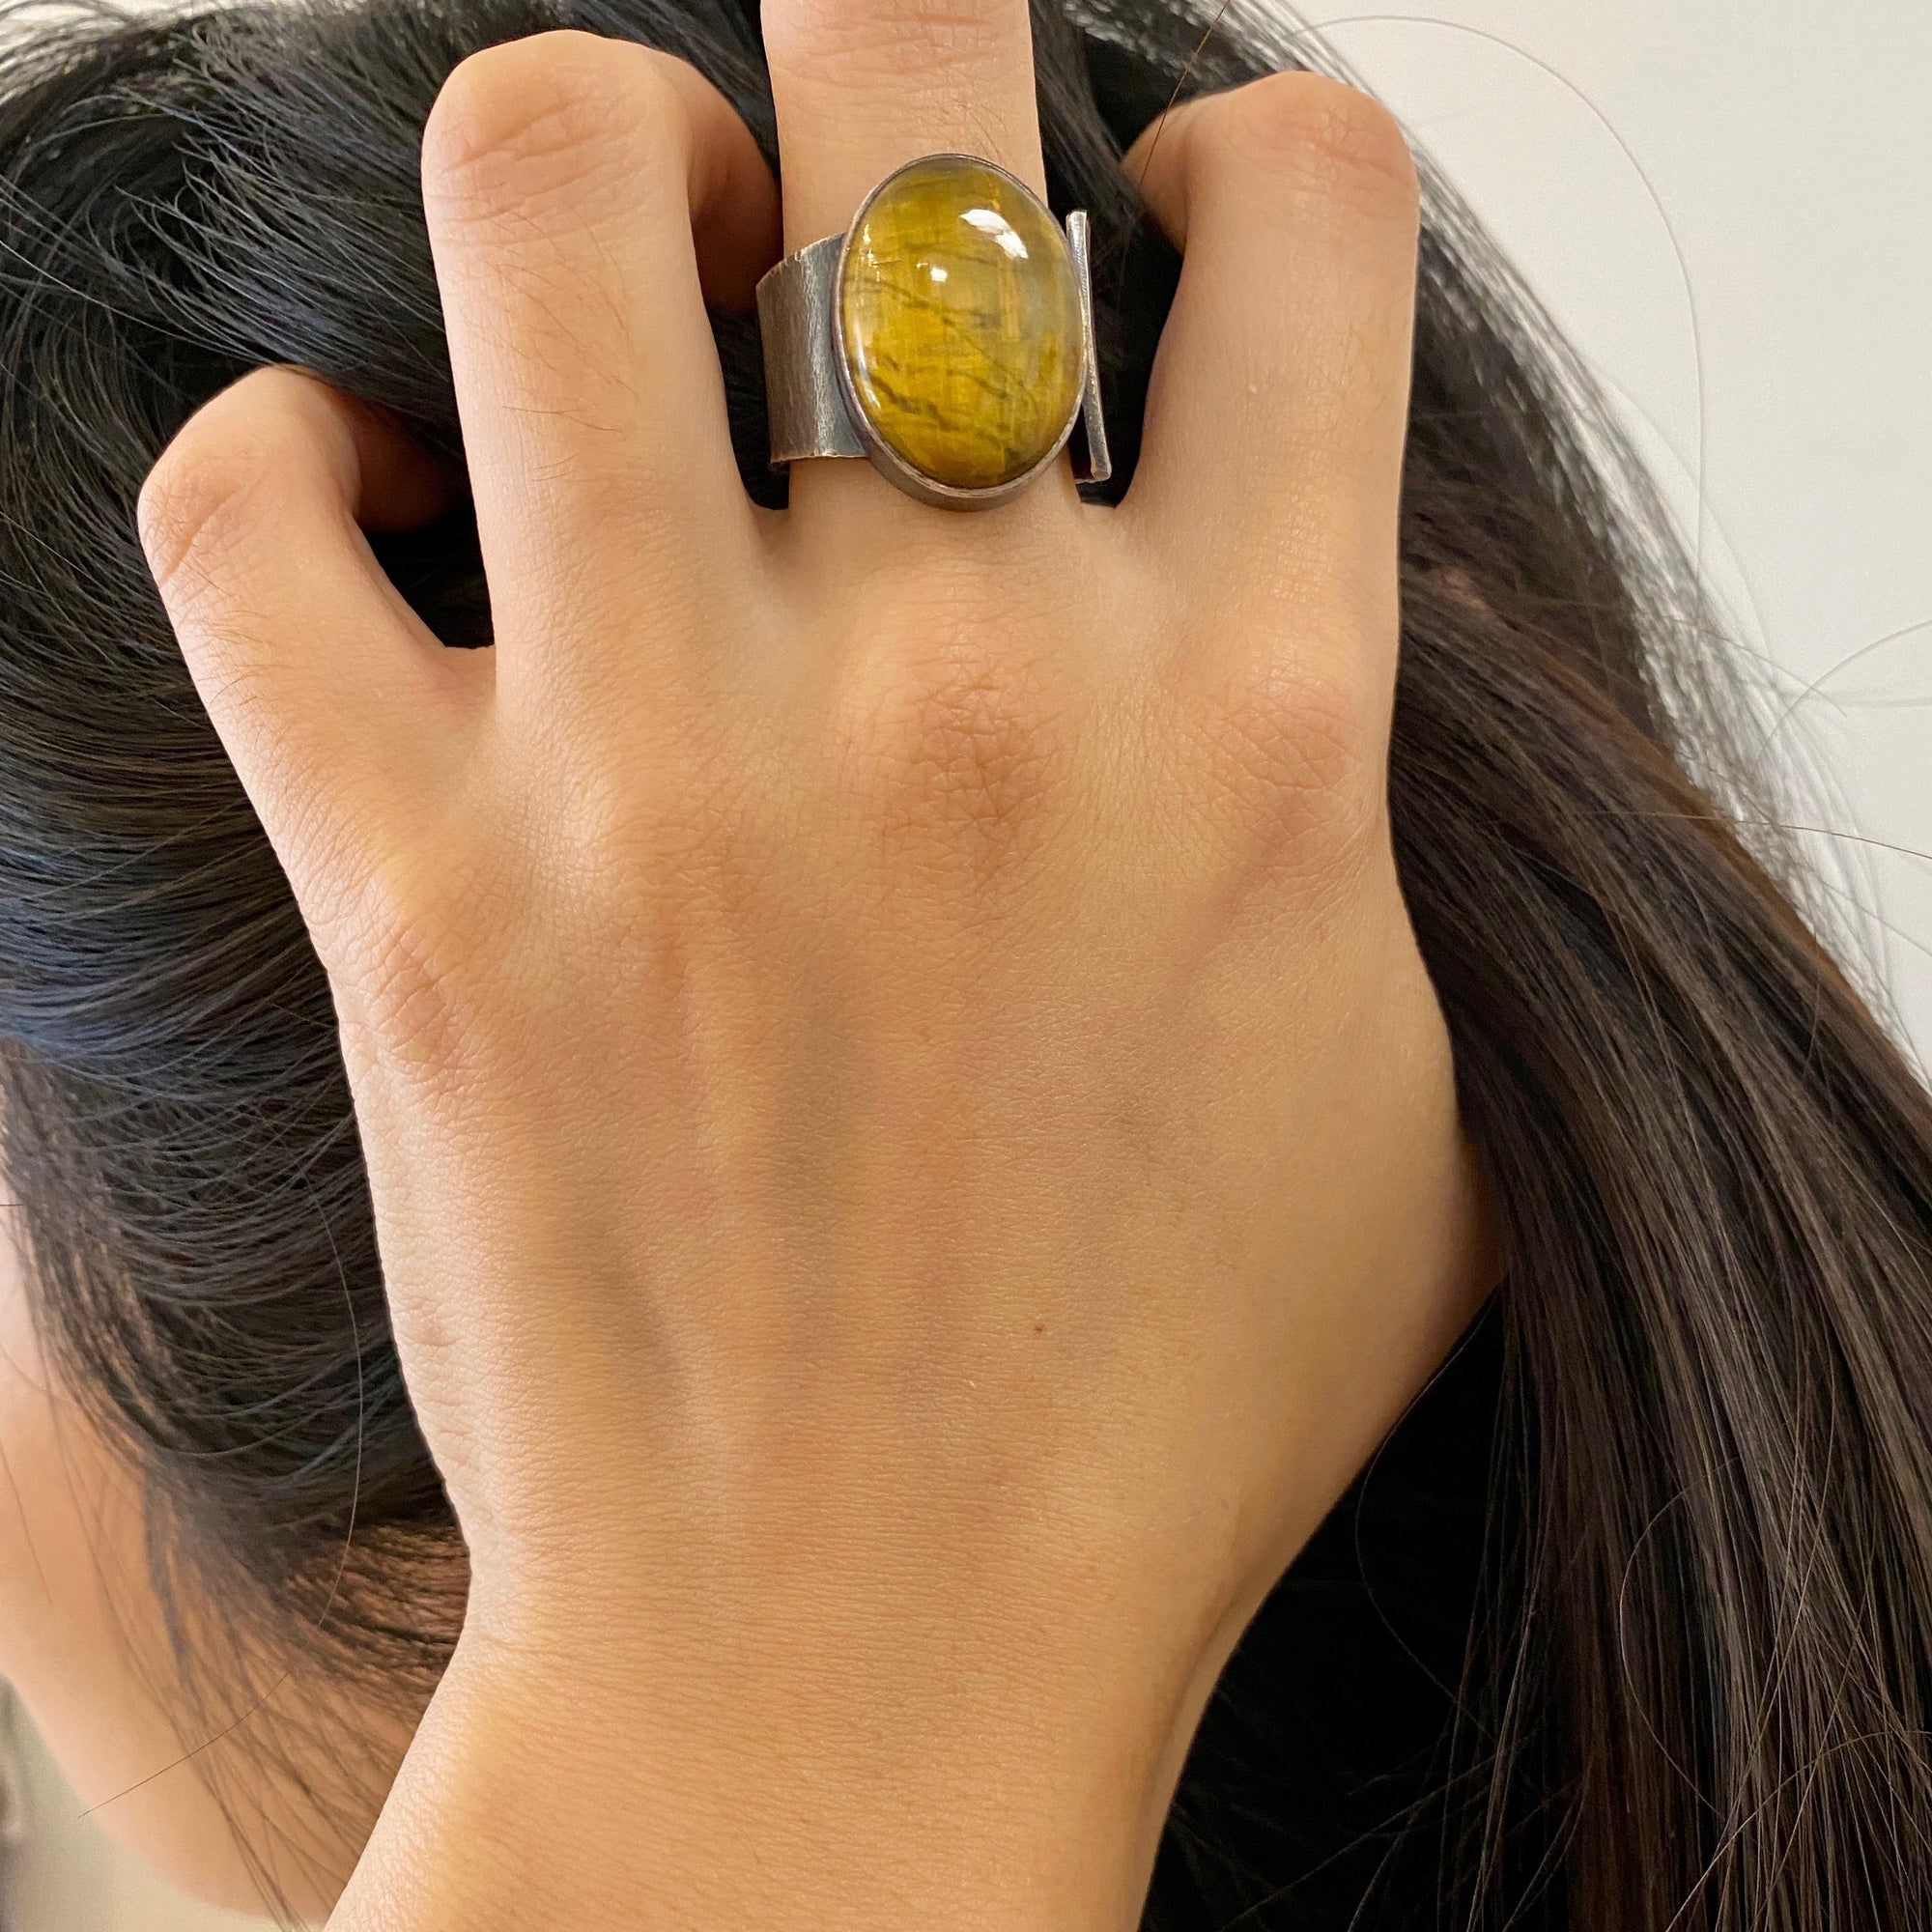 Wide oval shaped Nellite ring with a tiger's eye appearance in wafer textured sterling silver by Ayesha Mayadas